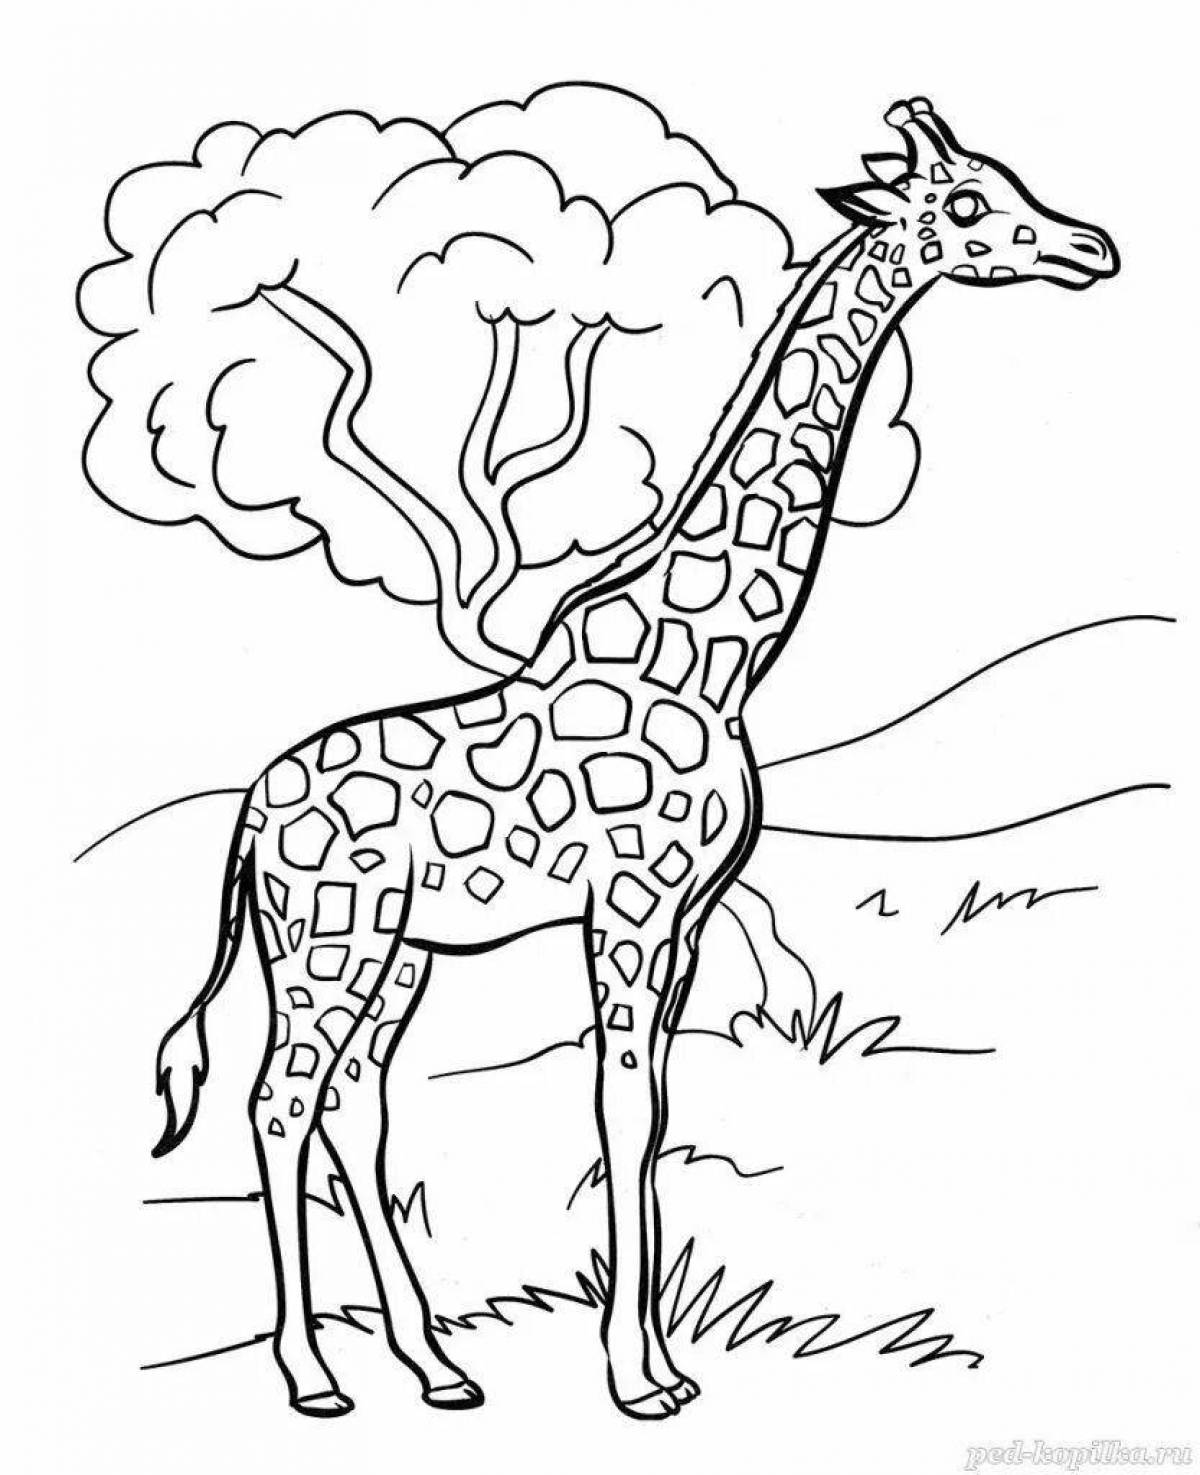 Colorful african animals coloring page for 5-7 year olds